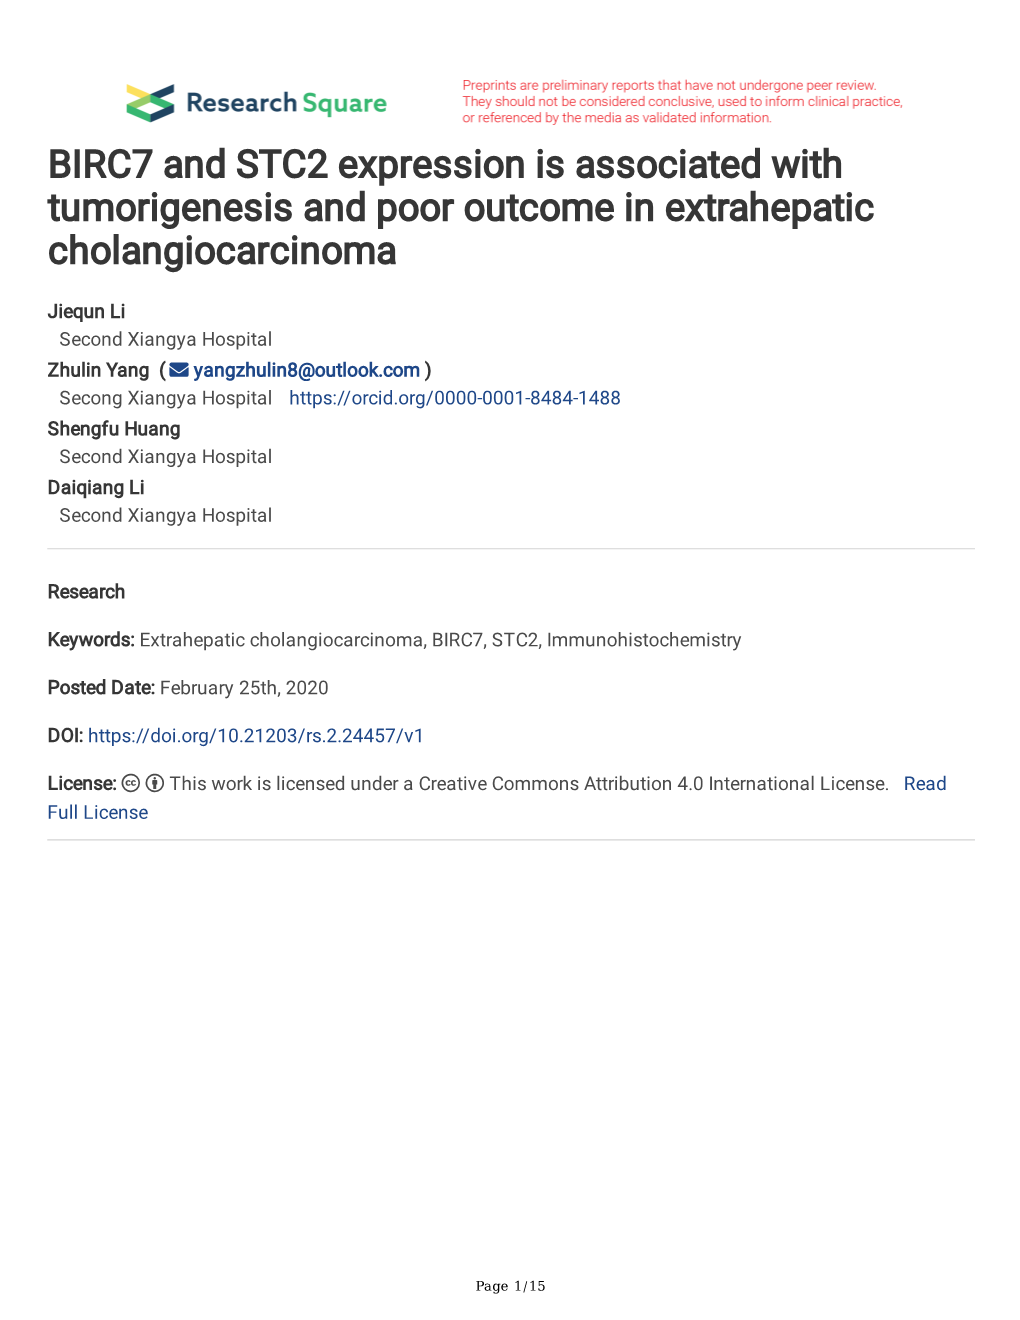 BIRC7 and STC2 Expression Is Associated with Tumorigenesis and Poor Outcome in Extrahepatic Cholangiocarcinoma